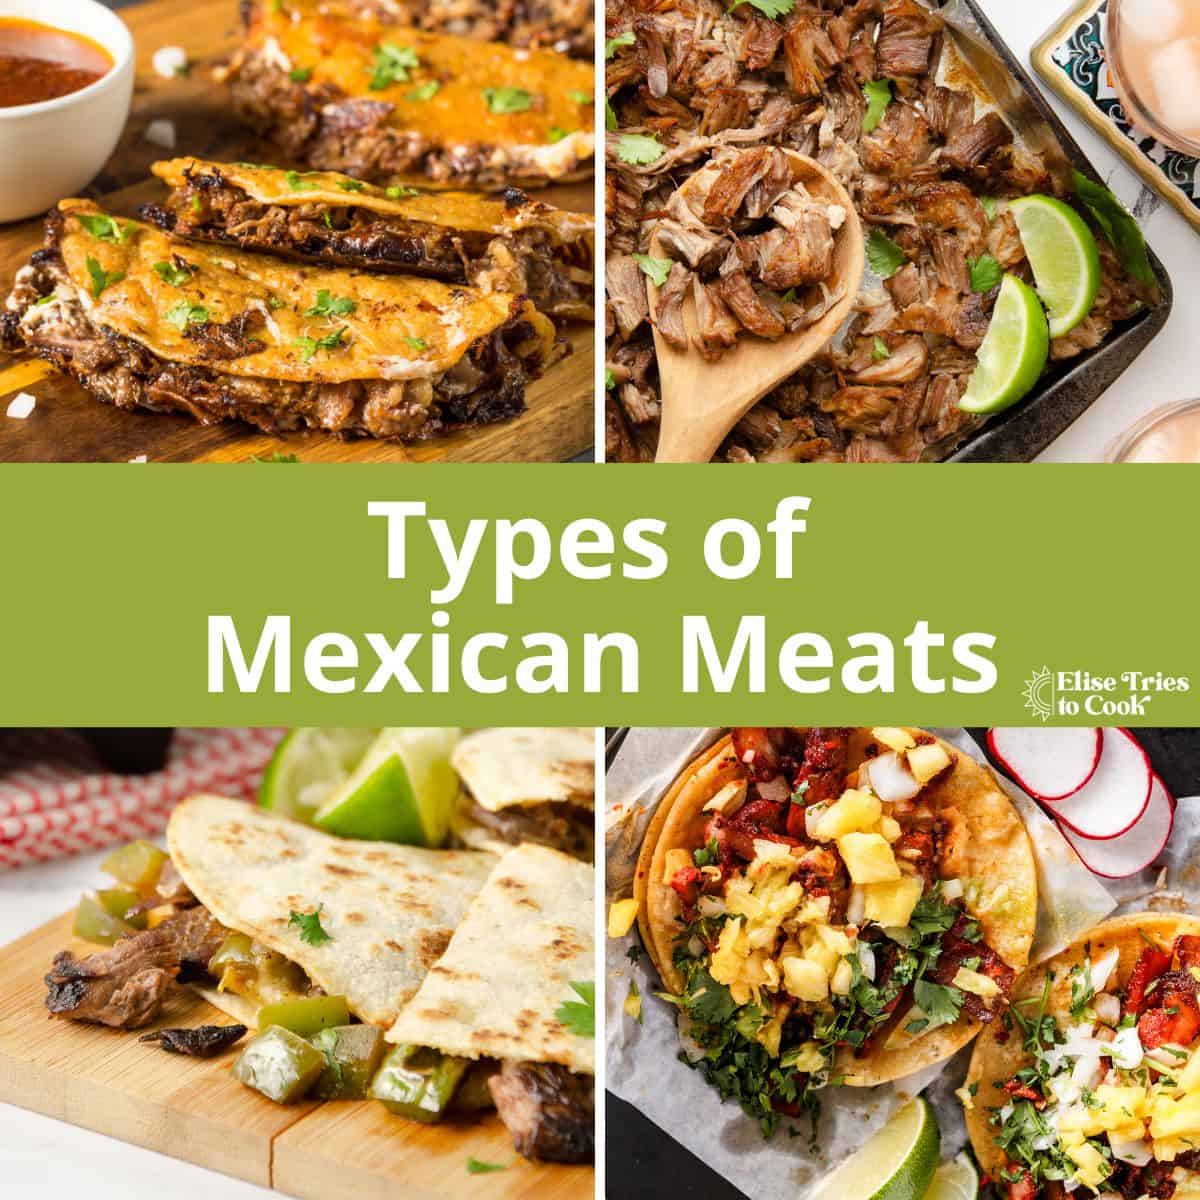 Types of Mexican Meats outlined with four images of different types of Mexican meats.